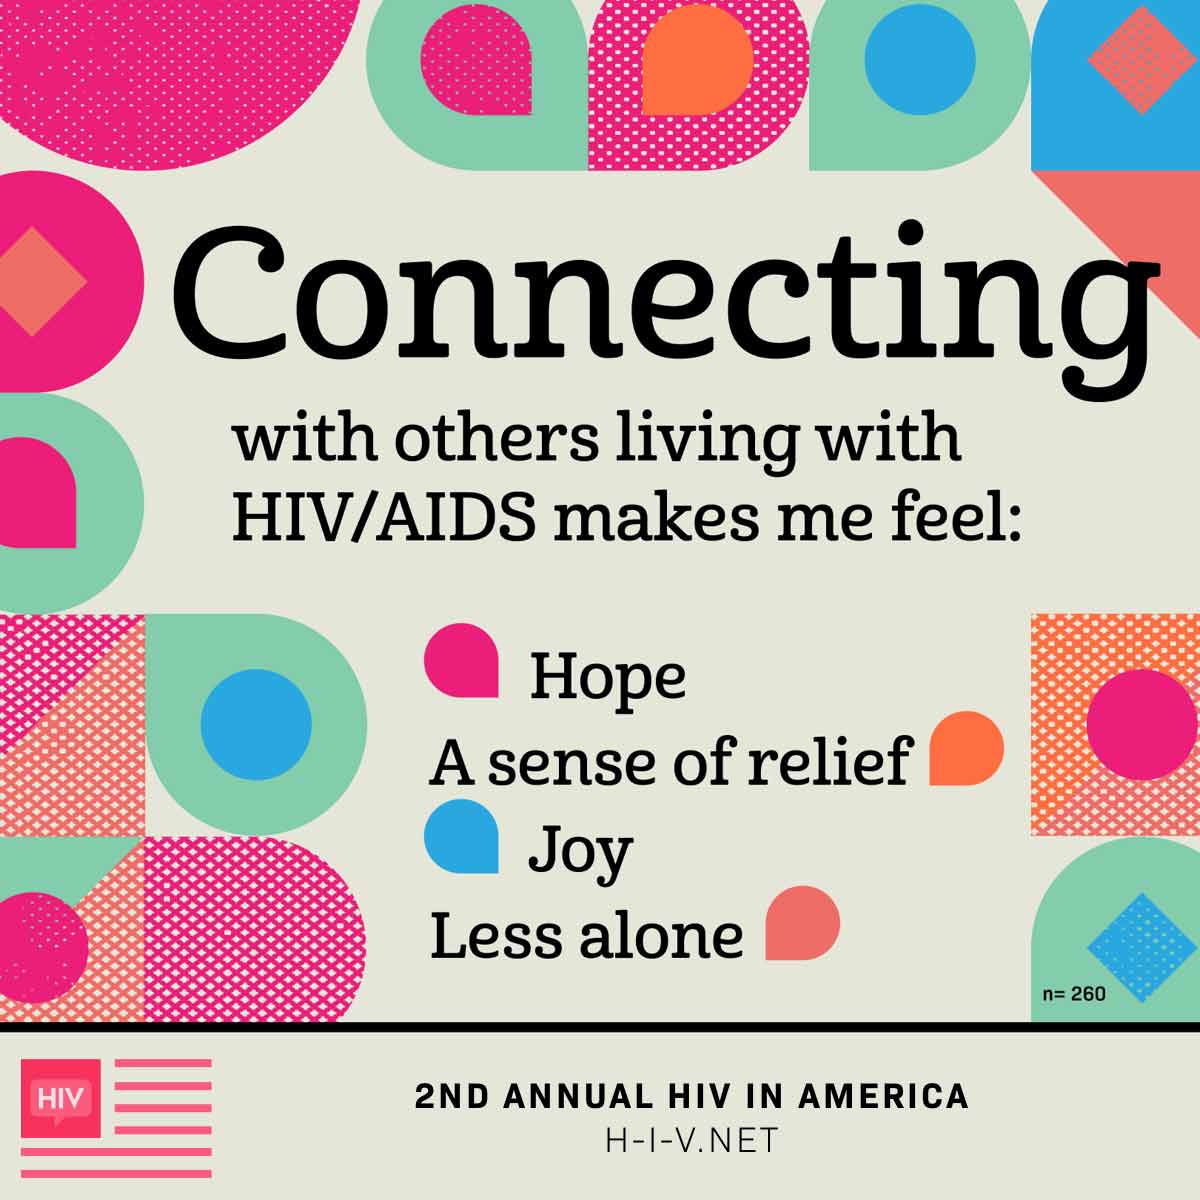 List of emotions of how it feels to connect with people living with HIV/AIDS. Hope, a sense of relief, less alone.